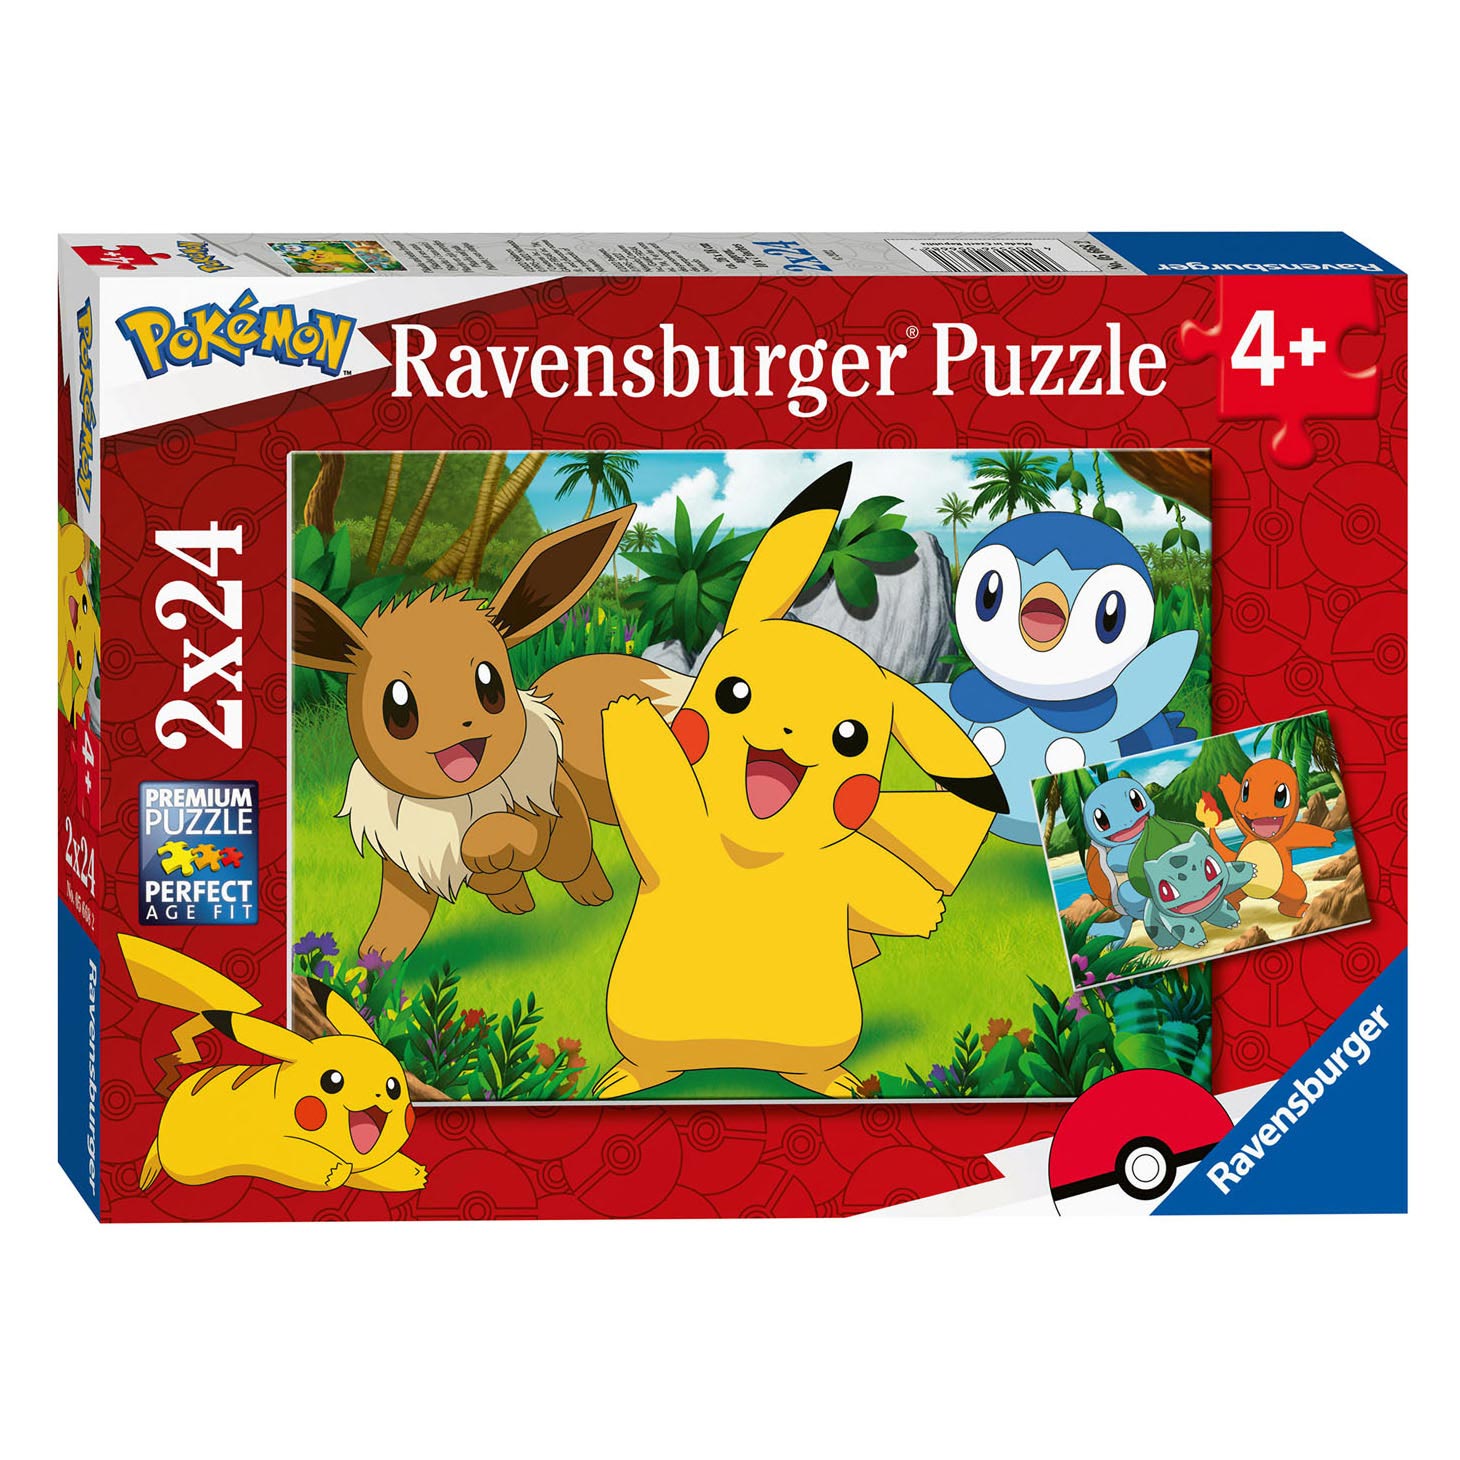 Ravensburger Puzzle - Pikachu and his Friends, 2x24st.